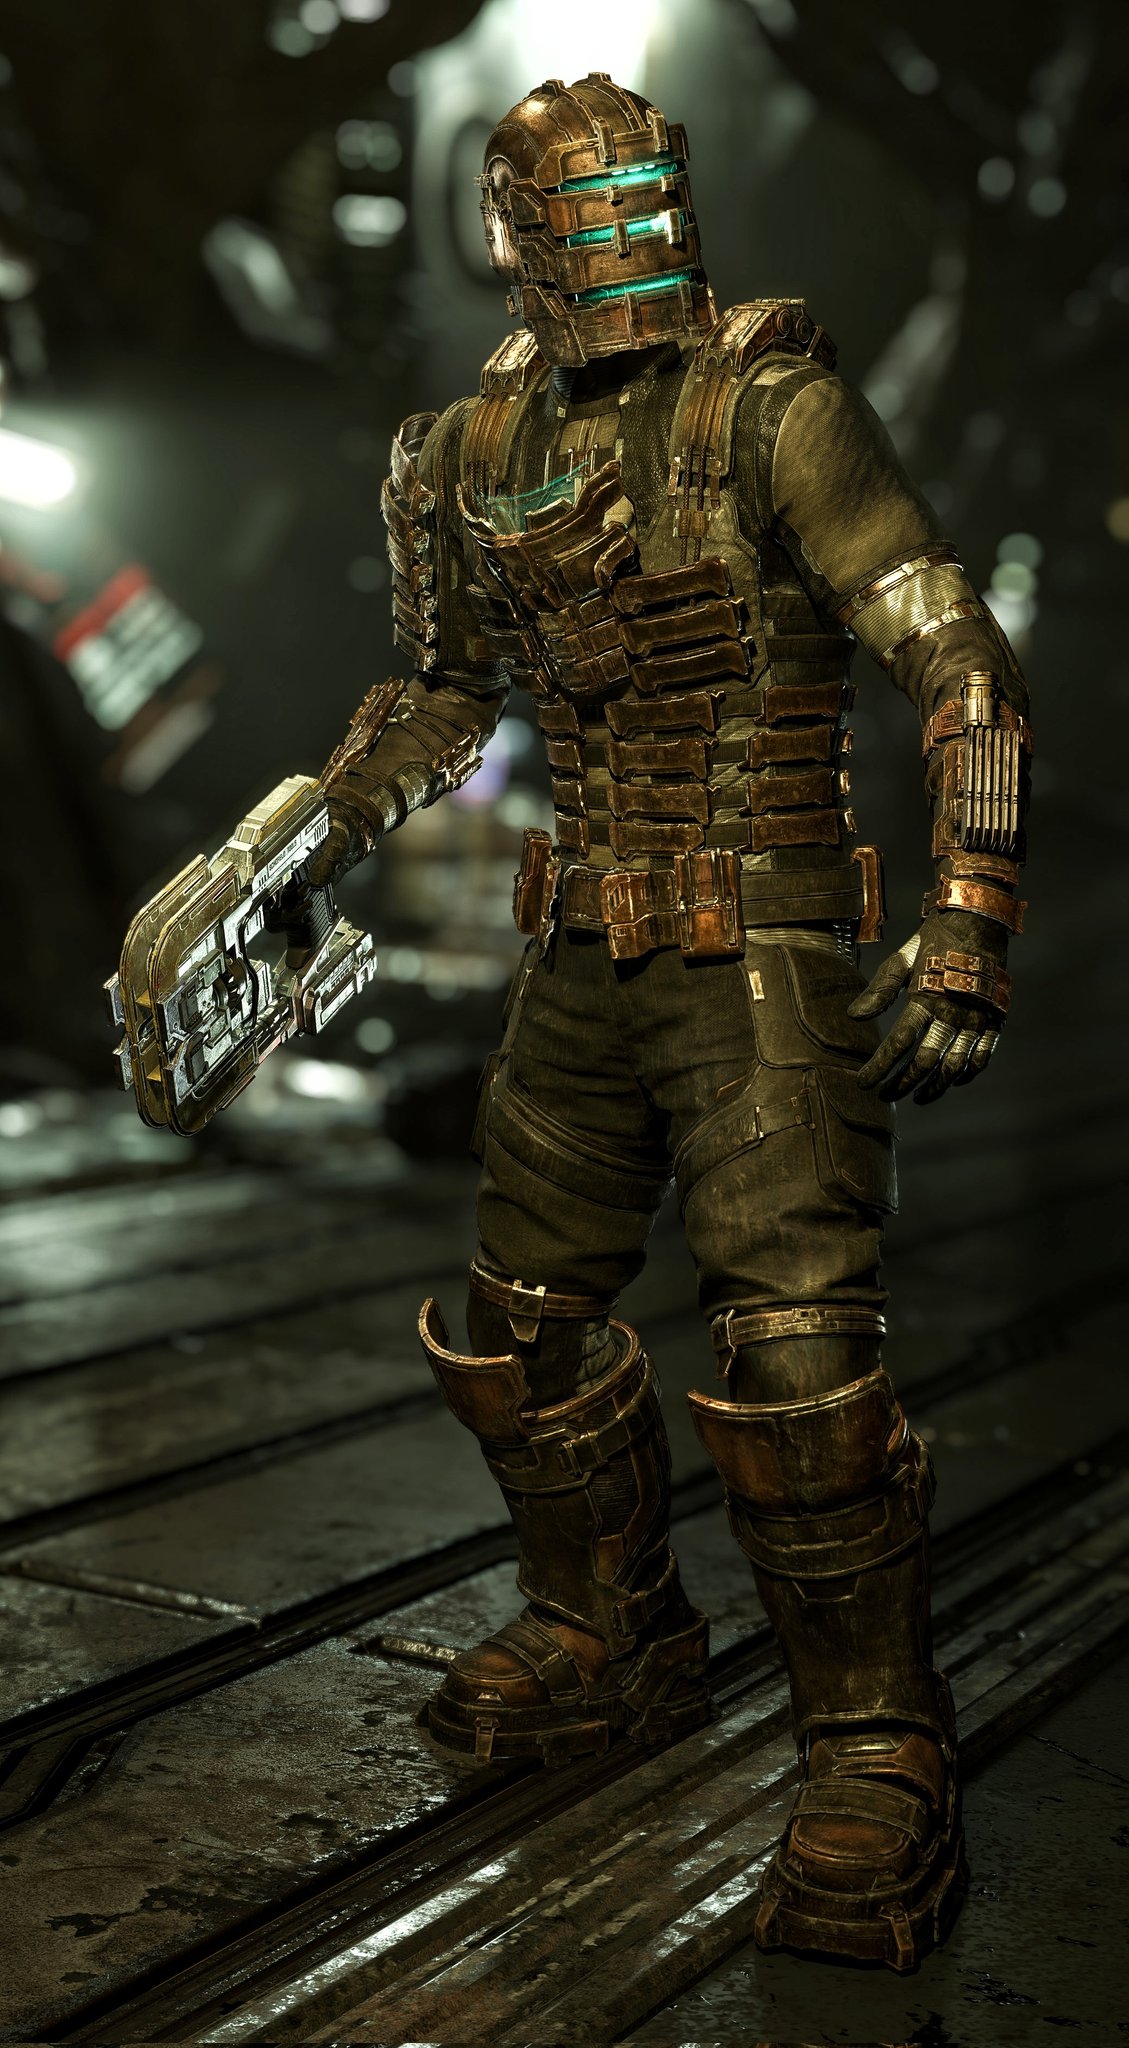 Dead Space Remake Suit Level 3: How To Upgrade and Get More